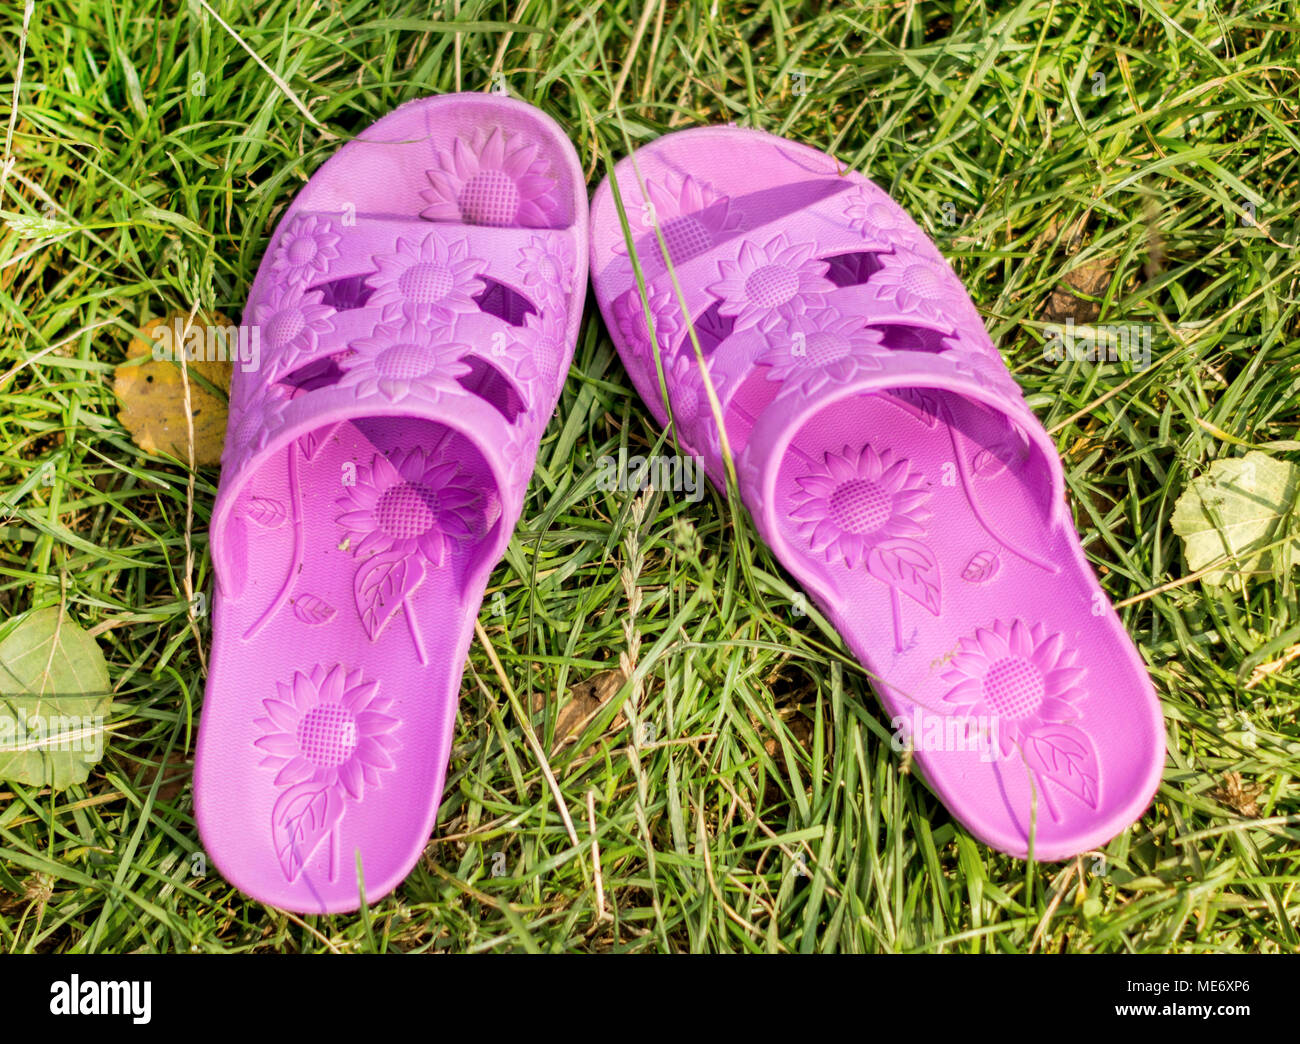 A pair of flip flops are left on field of a relaxed day. For your commercial and editorial use. Stock Photo